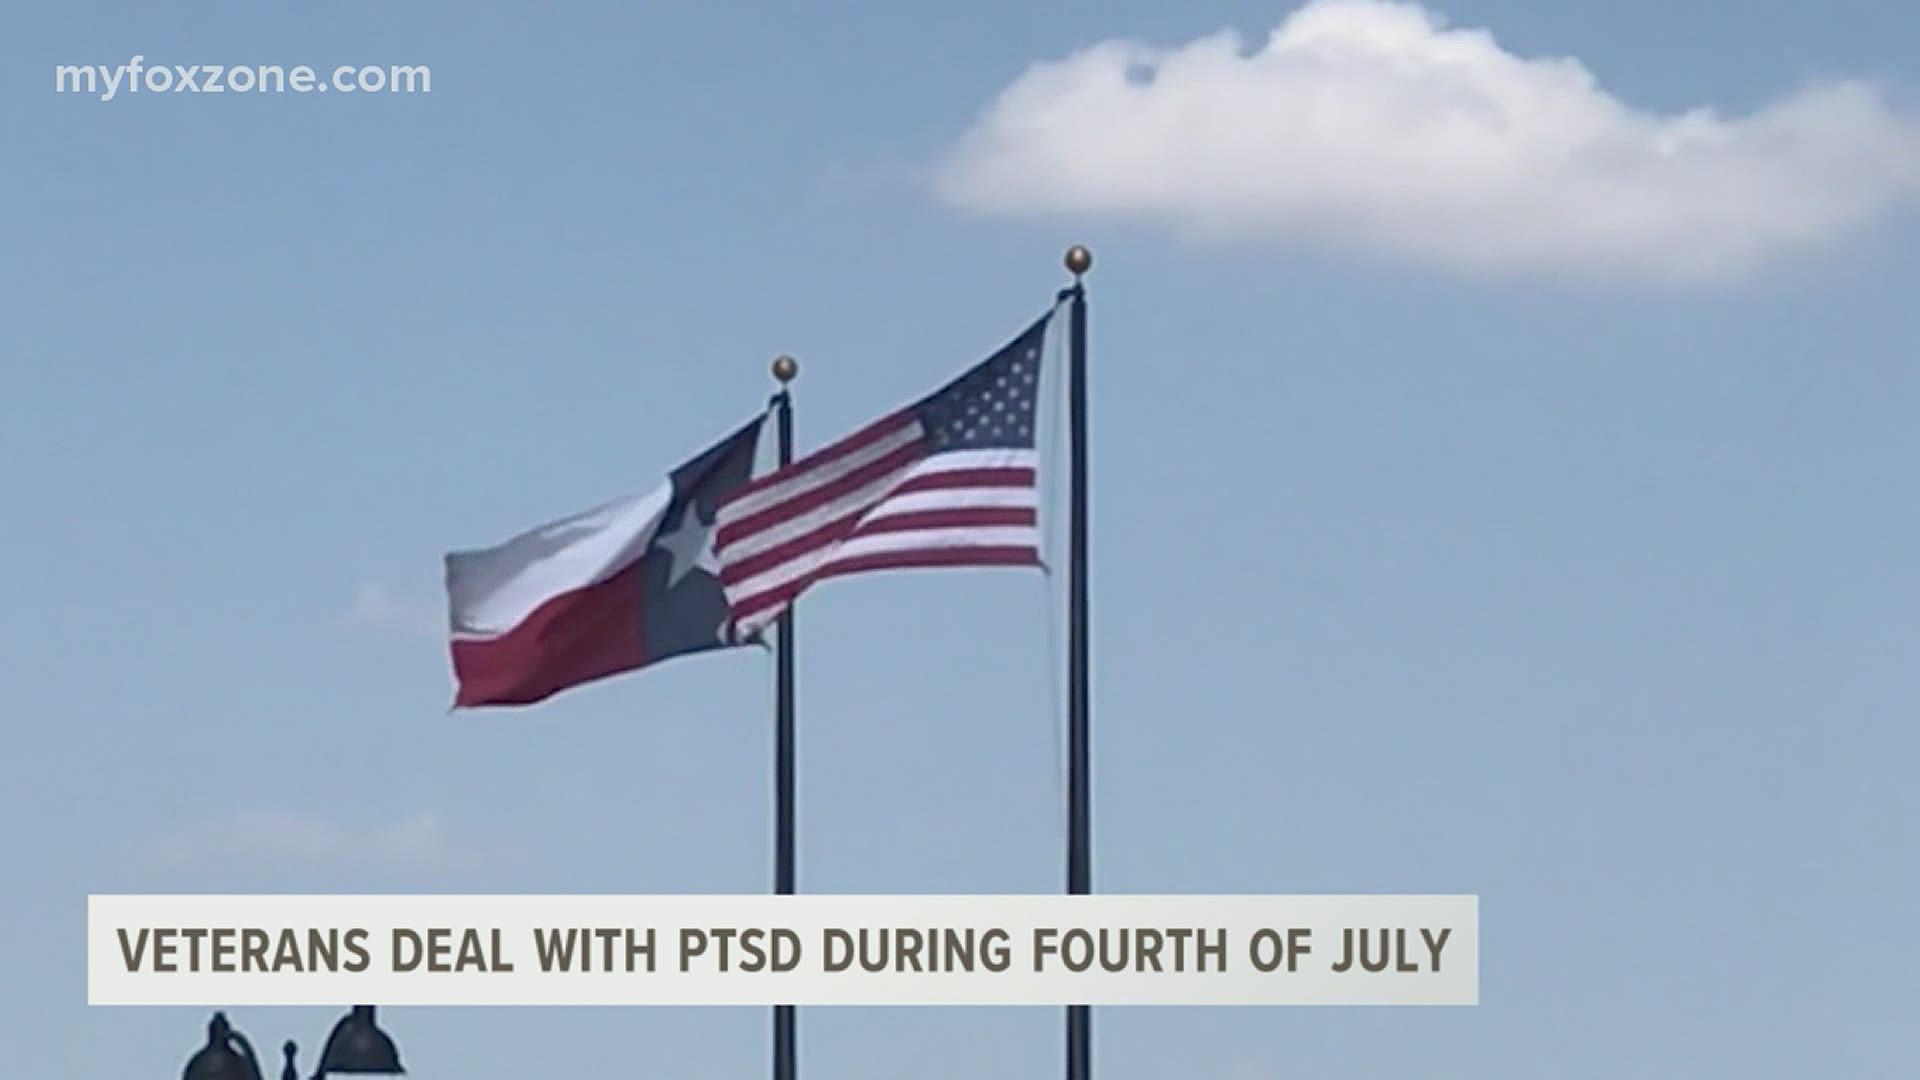 With Fourth of July approaching, some veterans struggle dealing with hearing loud fireworks.